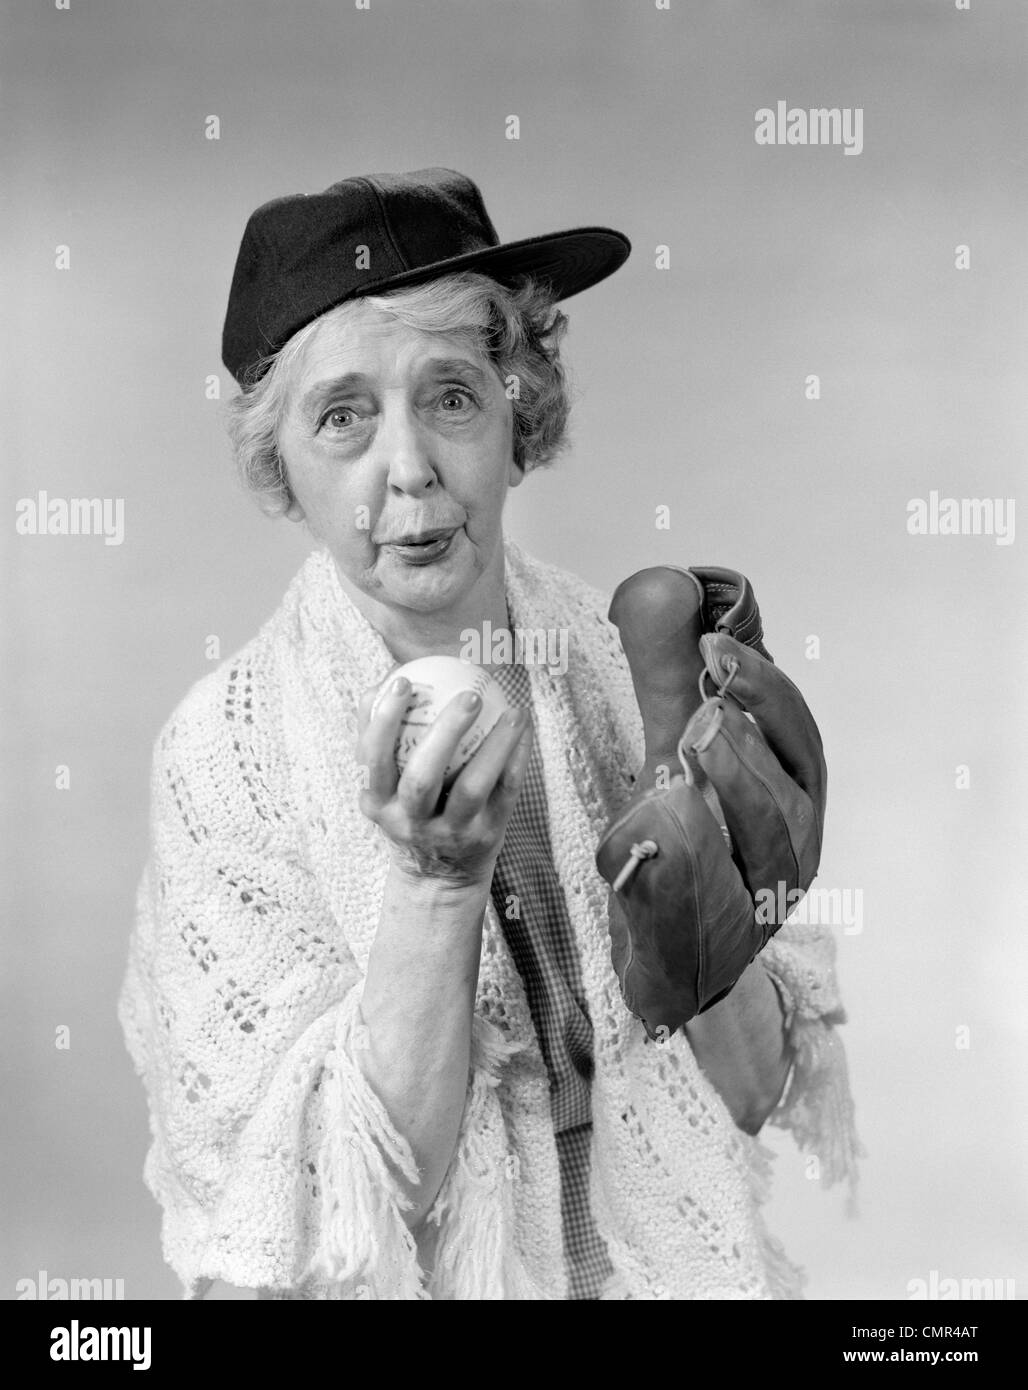 Années 1950 Années 1960 GRANNY WEARING BASEBALL HAT & GLOVE À PROPOS DE PITCH BALL LOOKING AT CAMERA Banque D'Images